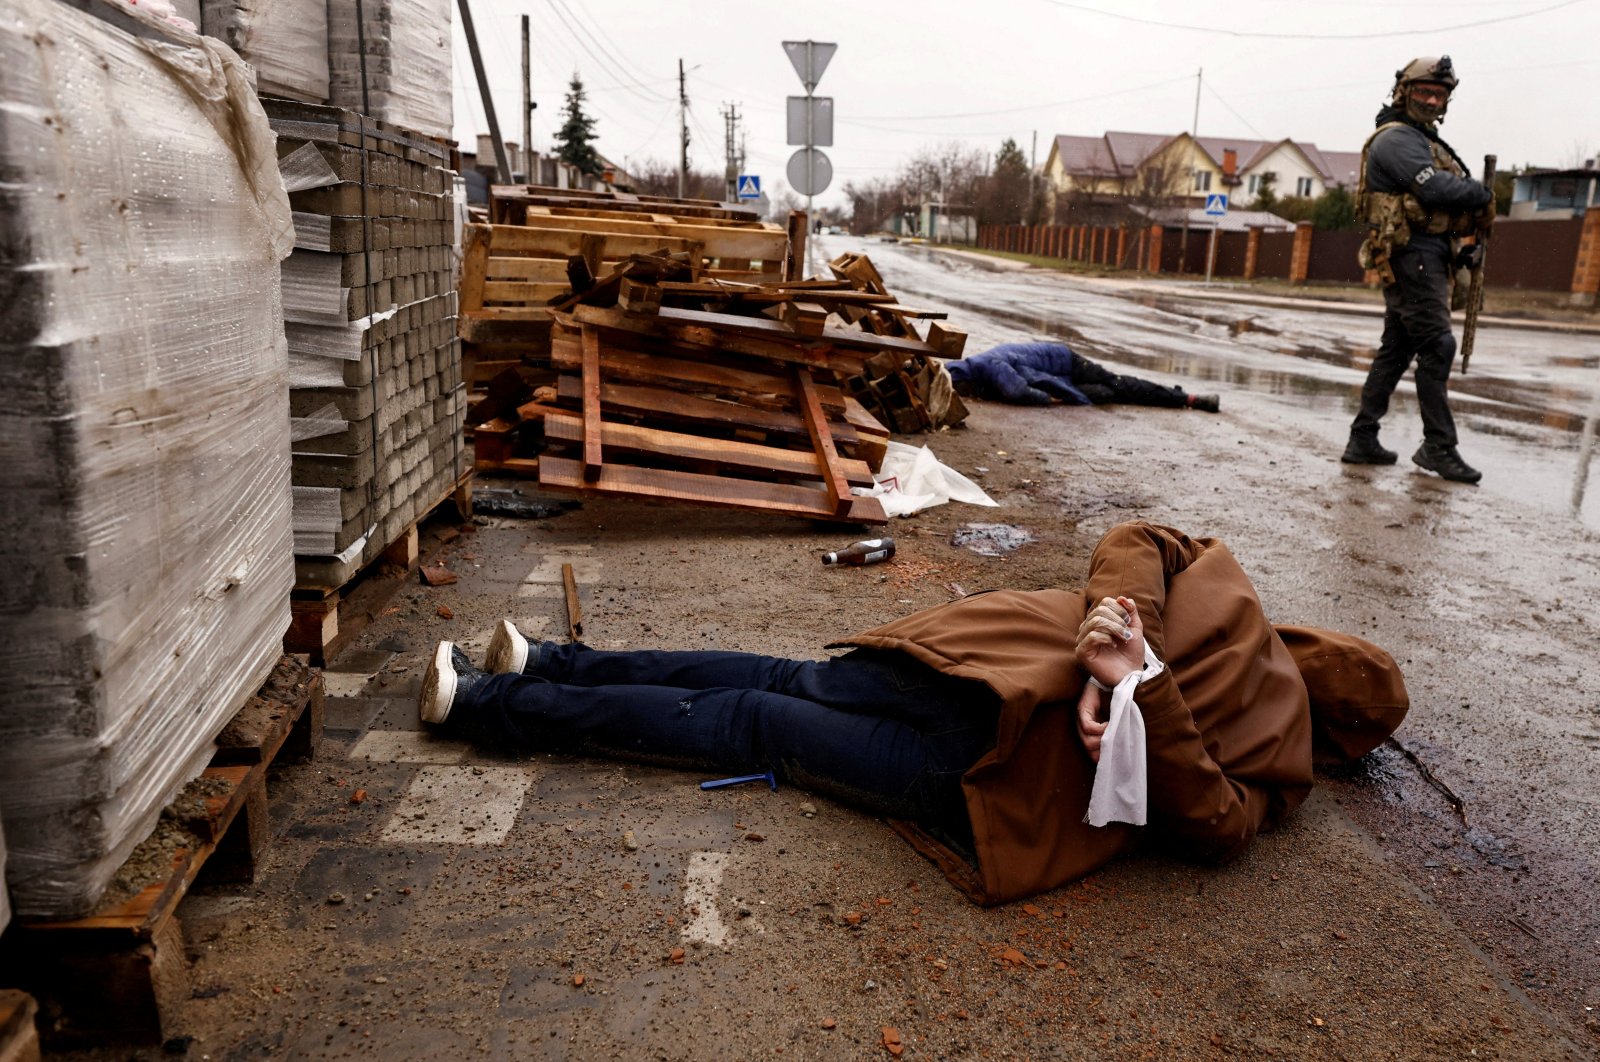 The body of an individual who residents say was shot by Russian soldiers lies in the street with their hands bound behind their back, Bucha, Ukraine, April 3, 2022. (Reuters Photo)